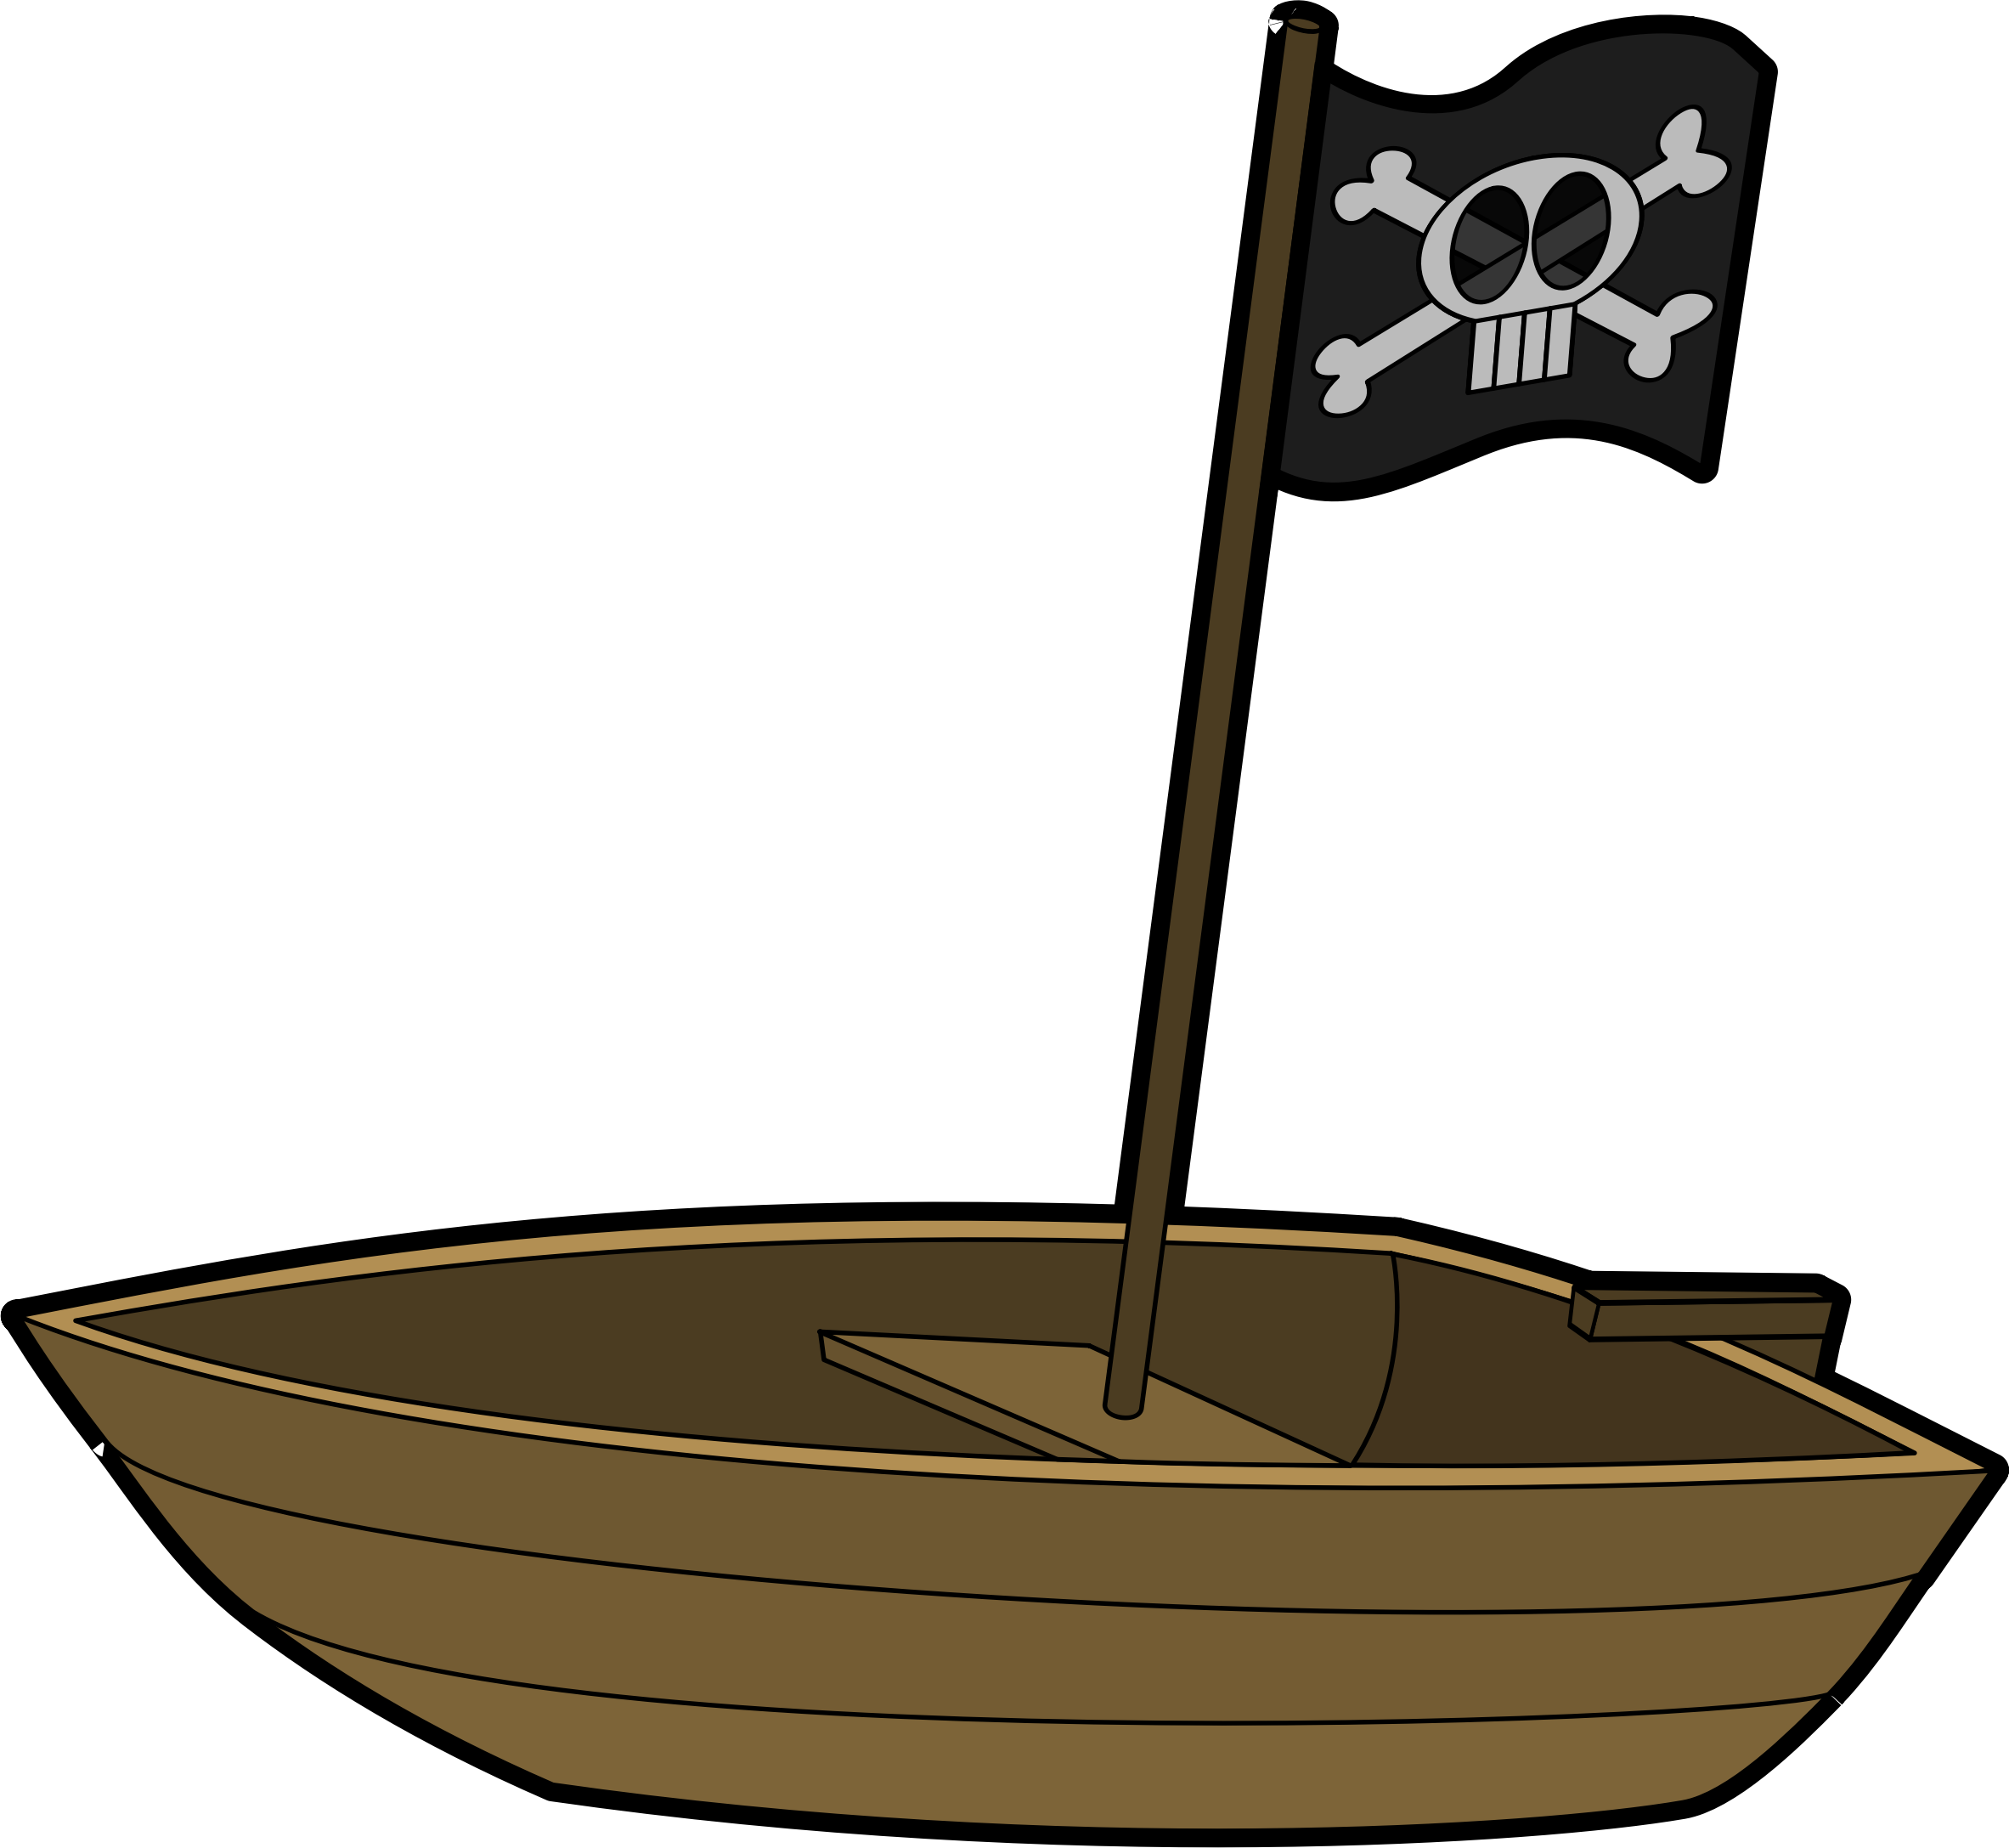 Pirate Boat with Pirate Flag Clip arts